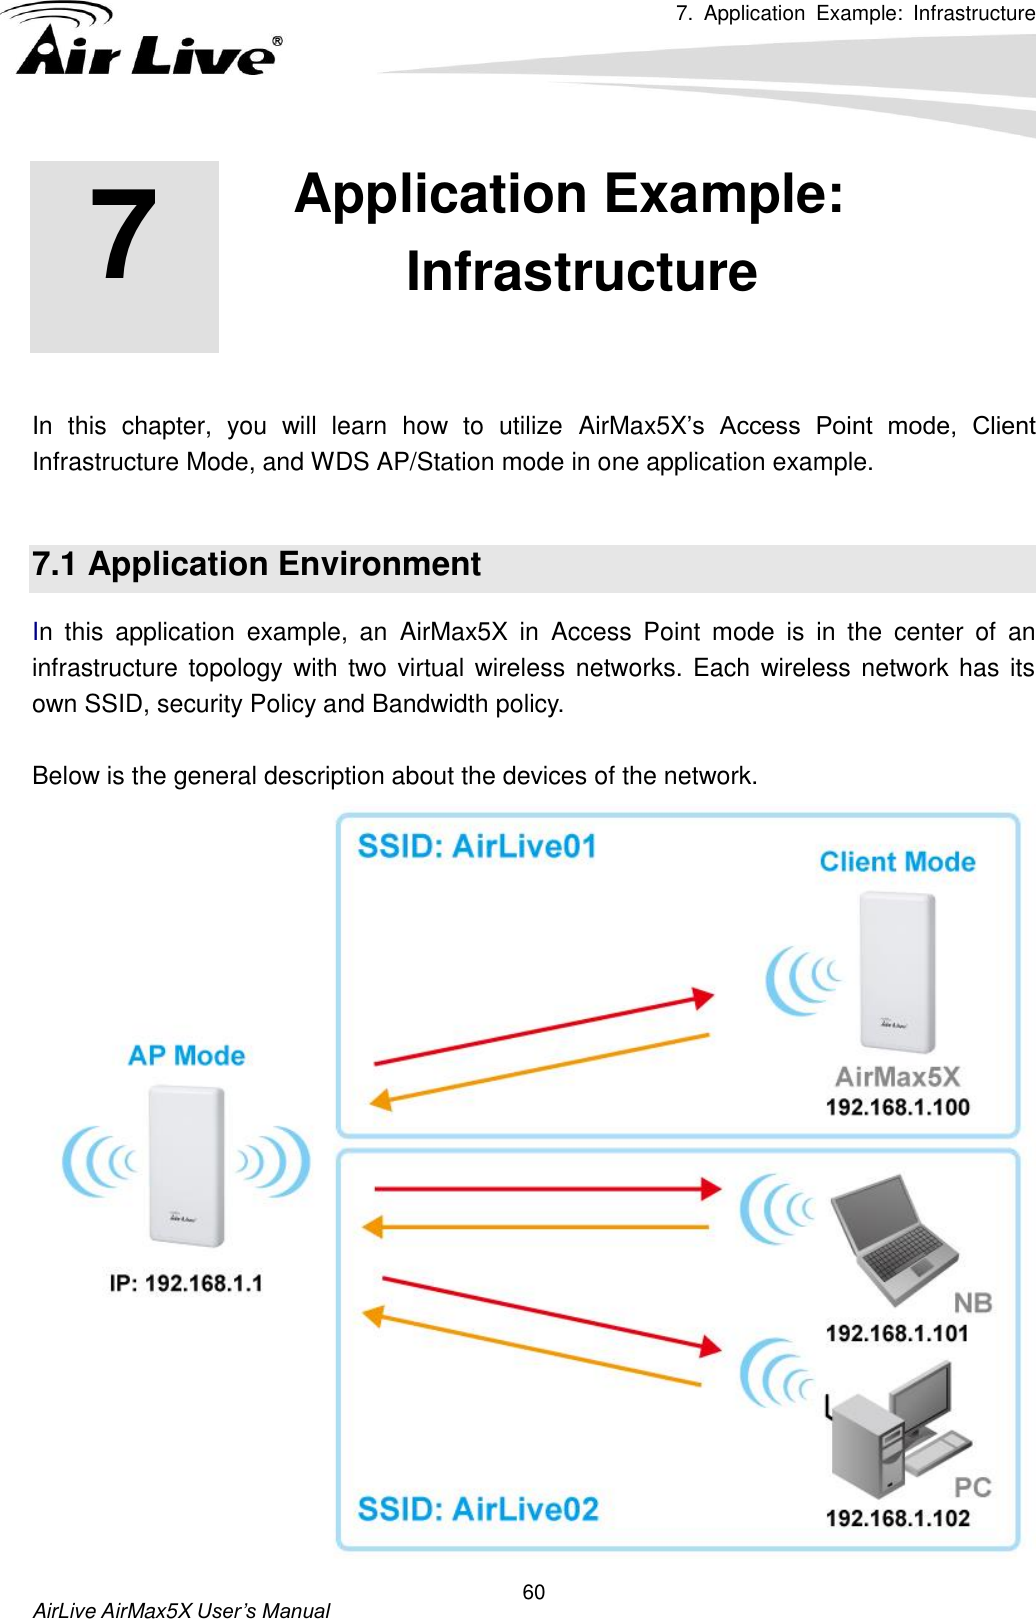 7.  Application  Example:  Infrastructure      AirLive AirMax5X User’s Manual 60        In  this  chapter,  you  will  learn  how  to  utilize  AirMax5X’s  Access  Point  mode,  Client Infrastructure Mode, and WDS AP/Station mode in one application example.      7.1 Application Environment In  this  application  example,  an  AirMax5X  in  Access  Point  mode  is  in  the  center  of  an infrastructure topology with  two virtual wireless networks. Each wireless network has its own SSID, security Policy and Bandwidth policy.    Below is the general description about the devices of the network.  7 7. Application Example: Infrastructure    